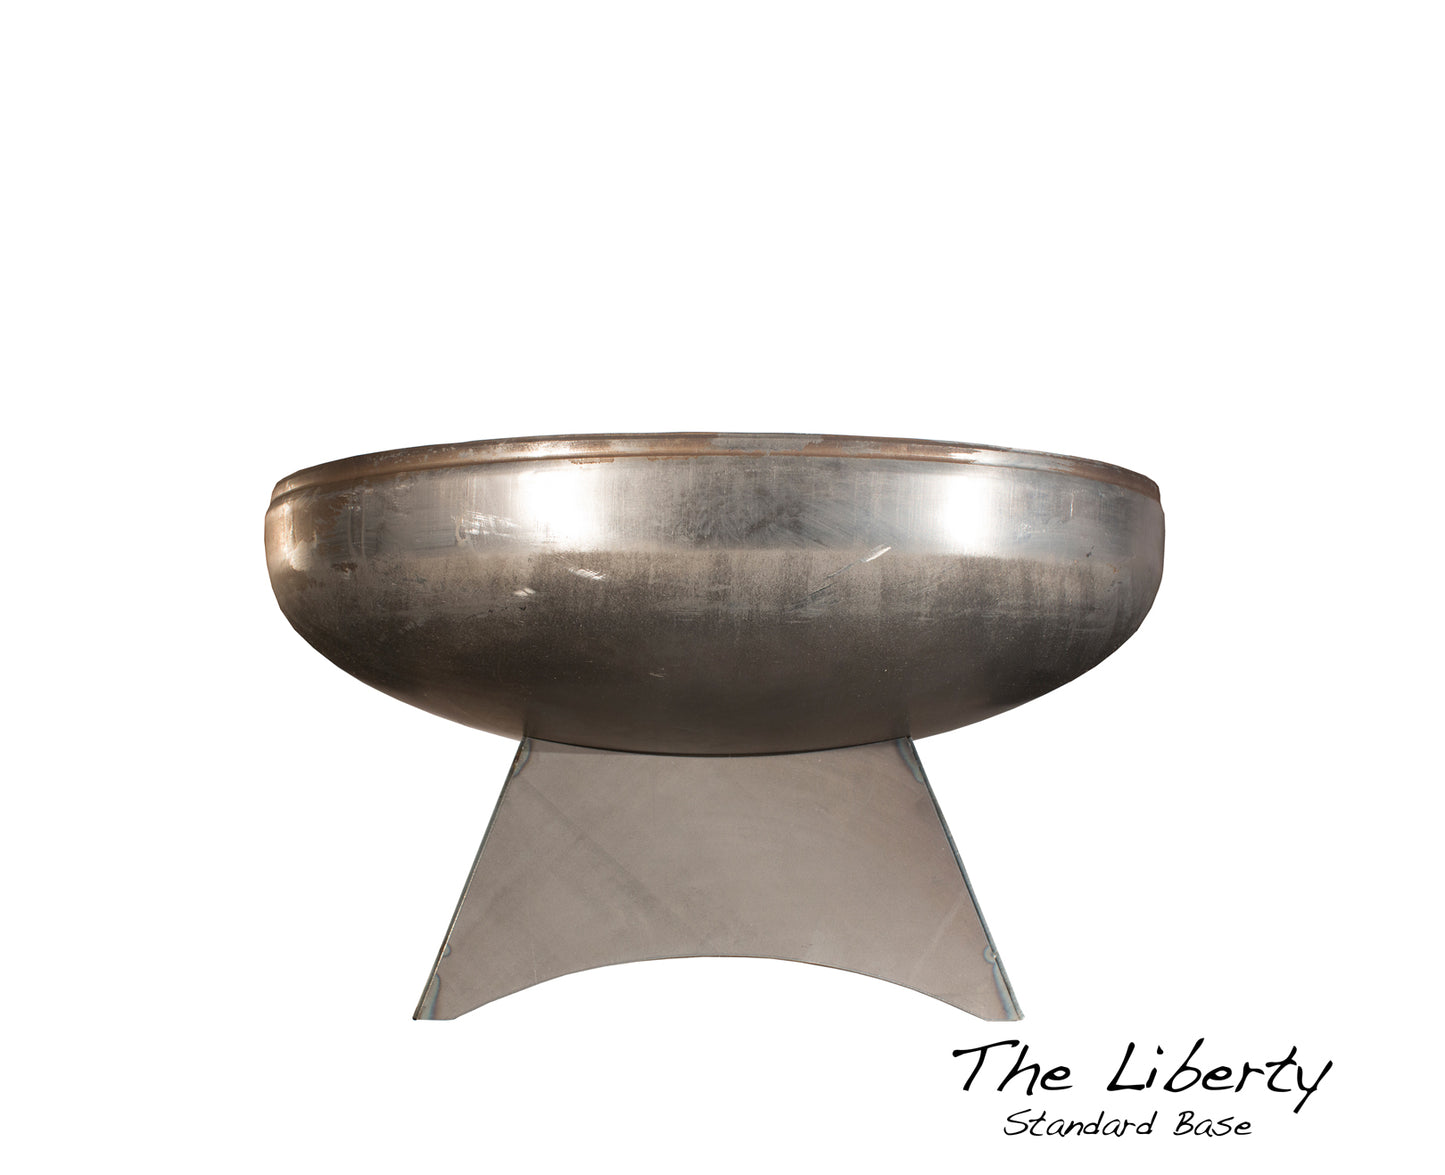 Liberty Fire Pit with Standard Base